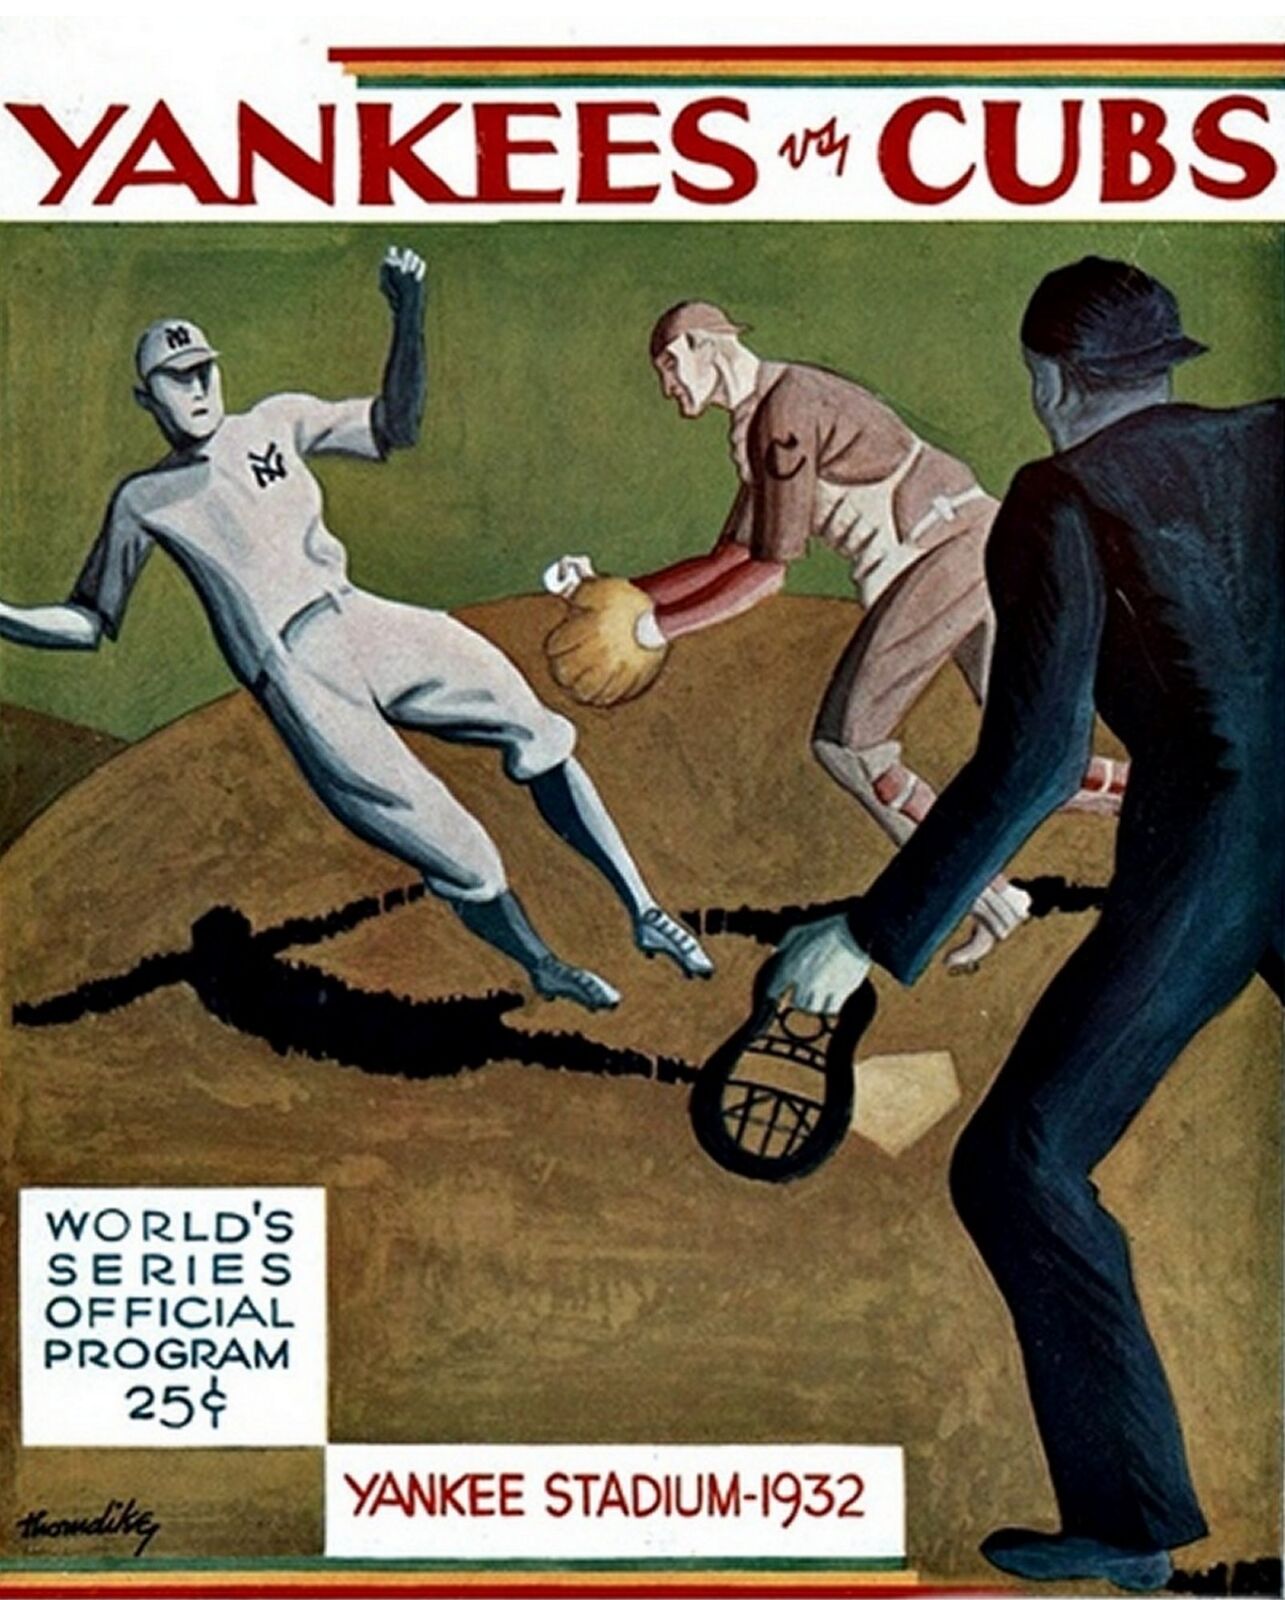 1932 YANKEES CUBS World Series Program Cover PHOTO (222-R)